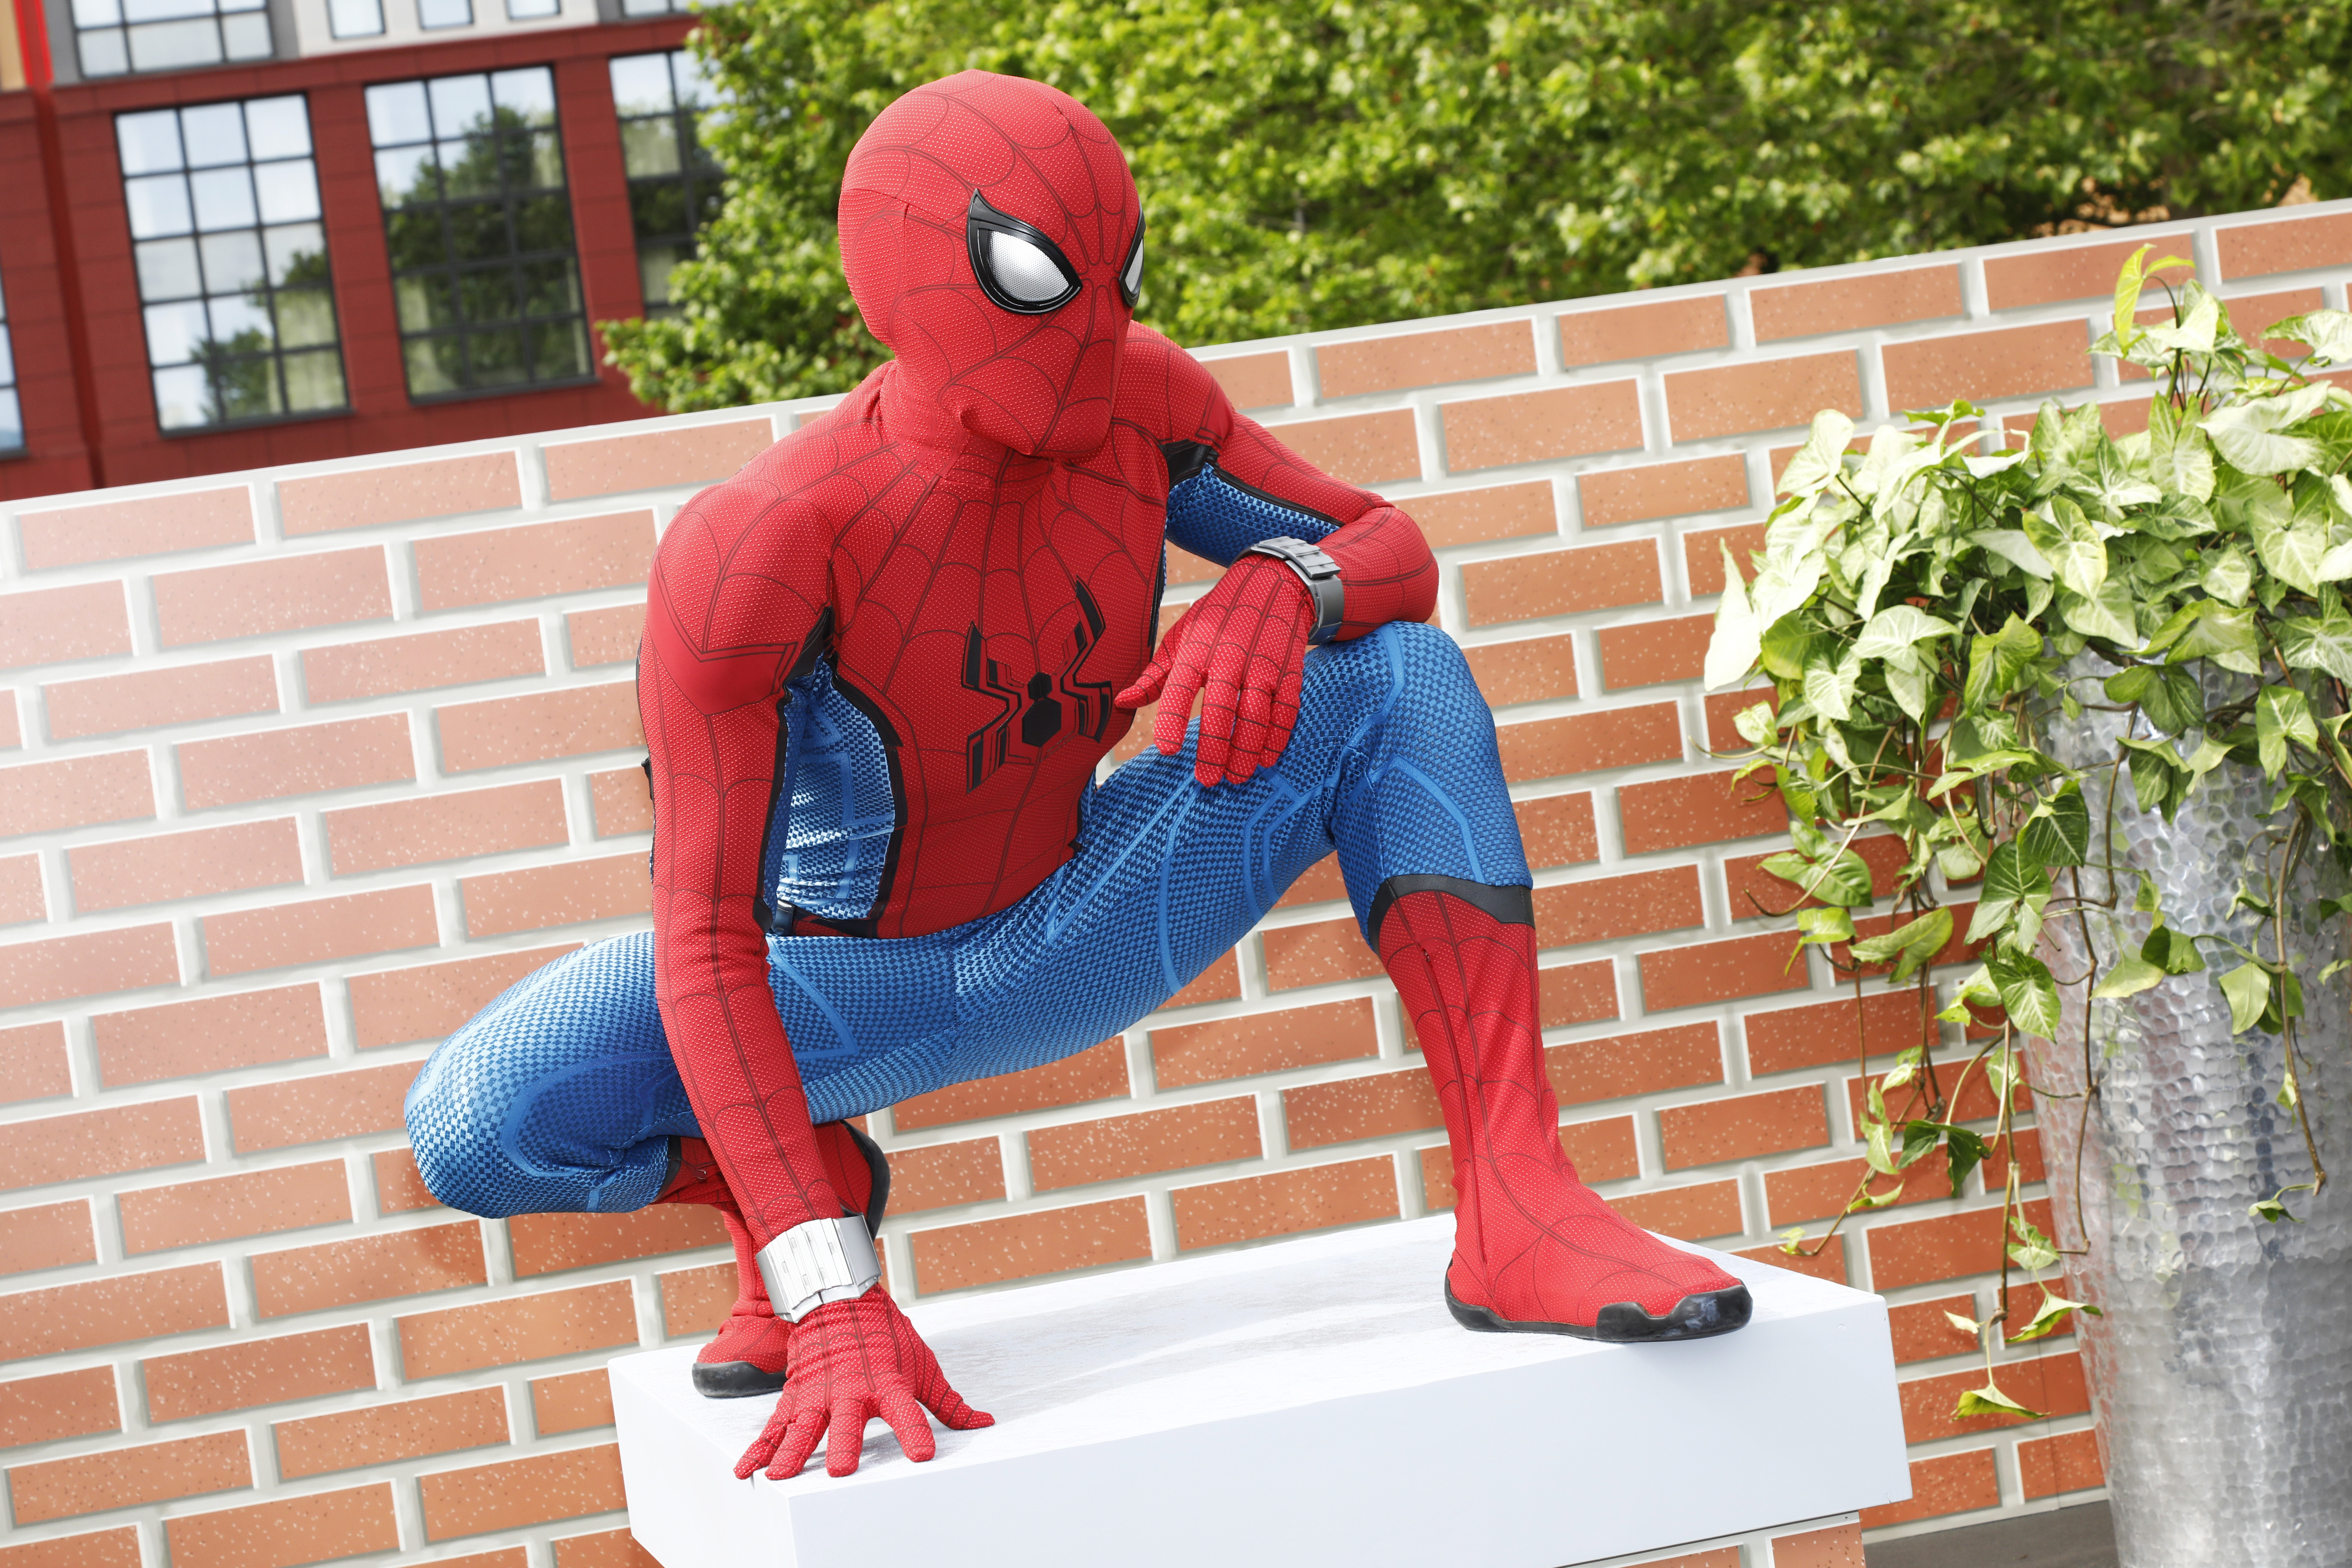 Spider-Man attends "The Art Of Marvel" Disney's Hotel New York opening on 26 June 2021 in Paris, France